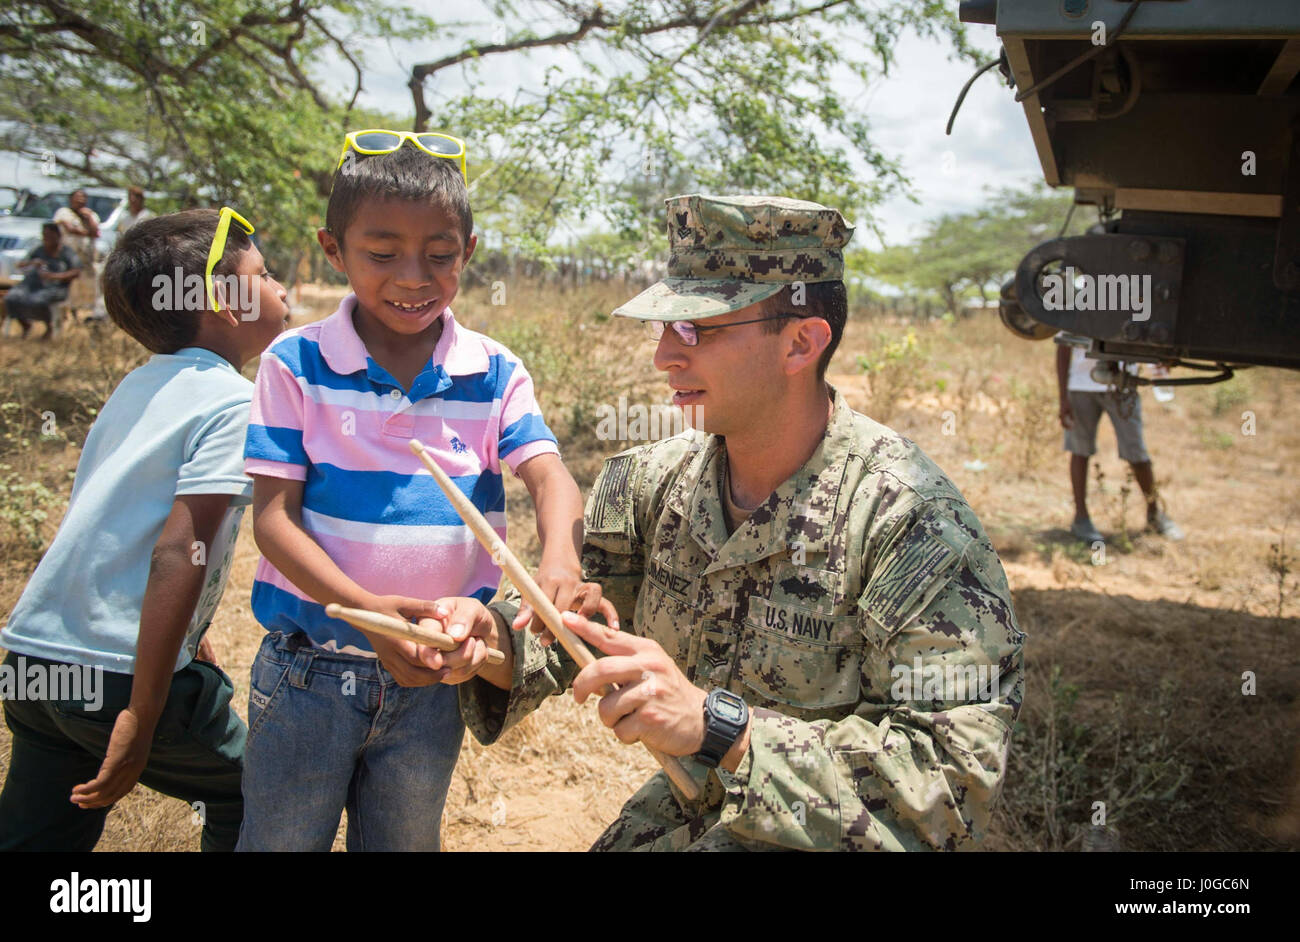 170330-N-YL073-377 MAYAPO, Colombia (March 30, 2017) - Engineering Aide 2nd Class Gabriel Jimenez (left), a native of Colombia assigned to Construction Battalion Maintenance Unit (CBMU) 202, teaches a Wayuu child how to use drumsticks during Continuing Promise 2017's (CP-17) visit to Mayapo, Colombia. CP-17 is a U.S. Southern Command-sponsored and U.S. Naval Forces Southern Command/U.S. 4th Fleet-conducted deployment to conduct civil-military operations including humanitarian assistance, training engagements, medical, dental, and veterinary support in an effort to show U.S. support and commitm Stock Photo